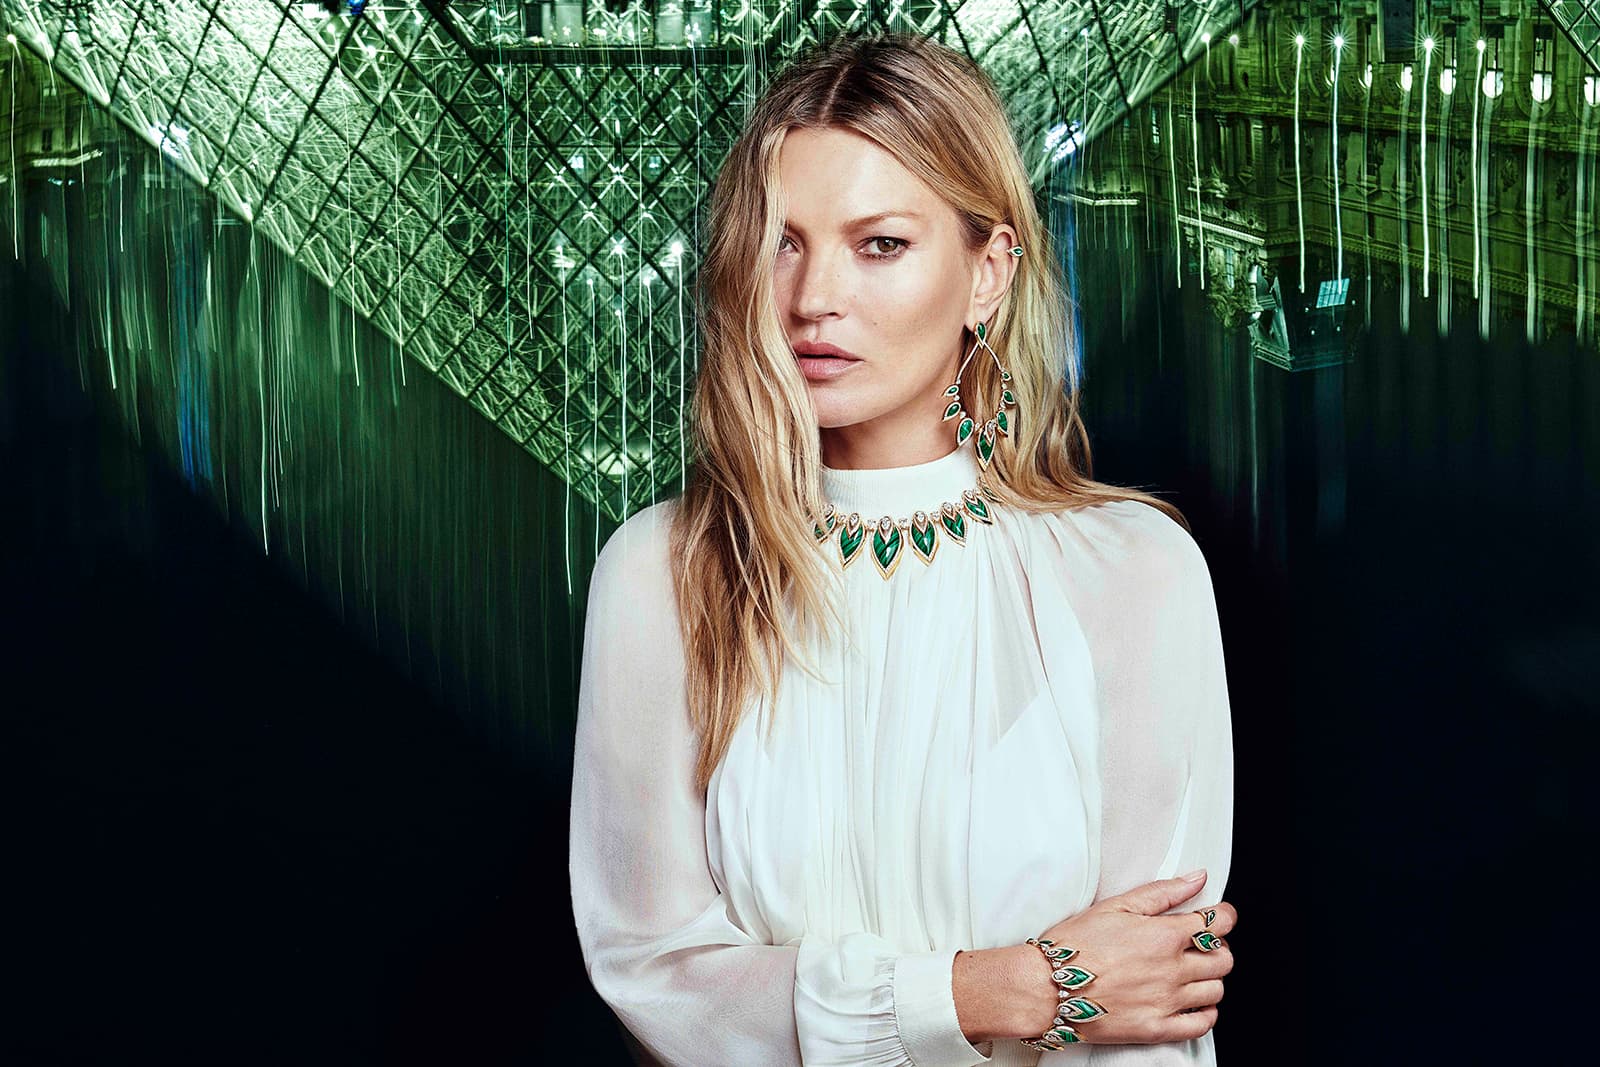 The Messika by Kate Moss collection sees the Parisian jeweller use ornamental hard stones like malachite for the first time